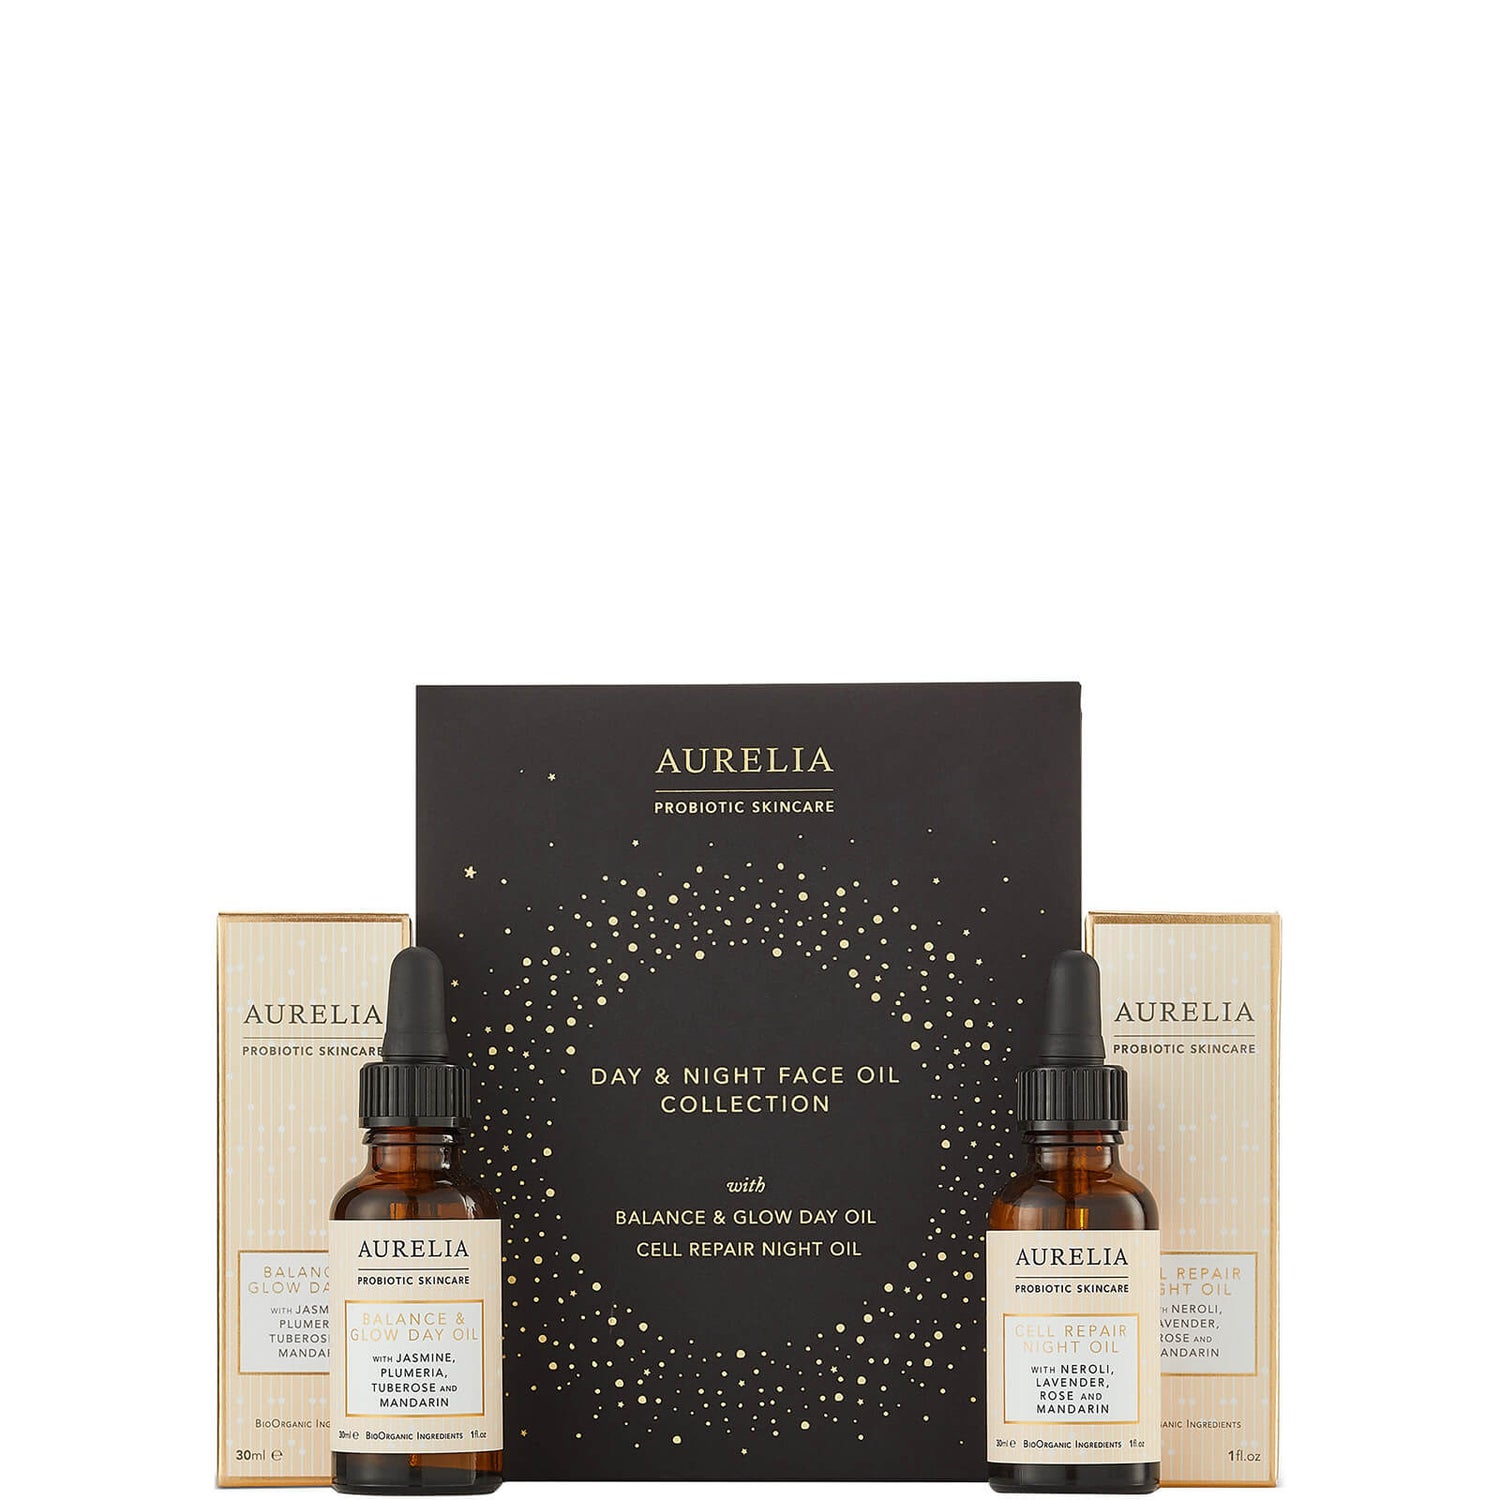 Aurelia Probiotic Skincare Day and Night Oil Collection 60ml 総額¥10,700円以上